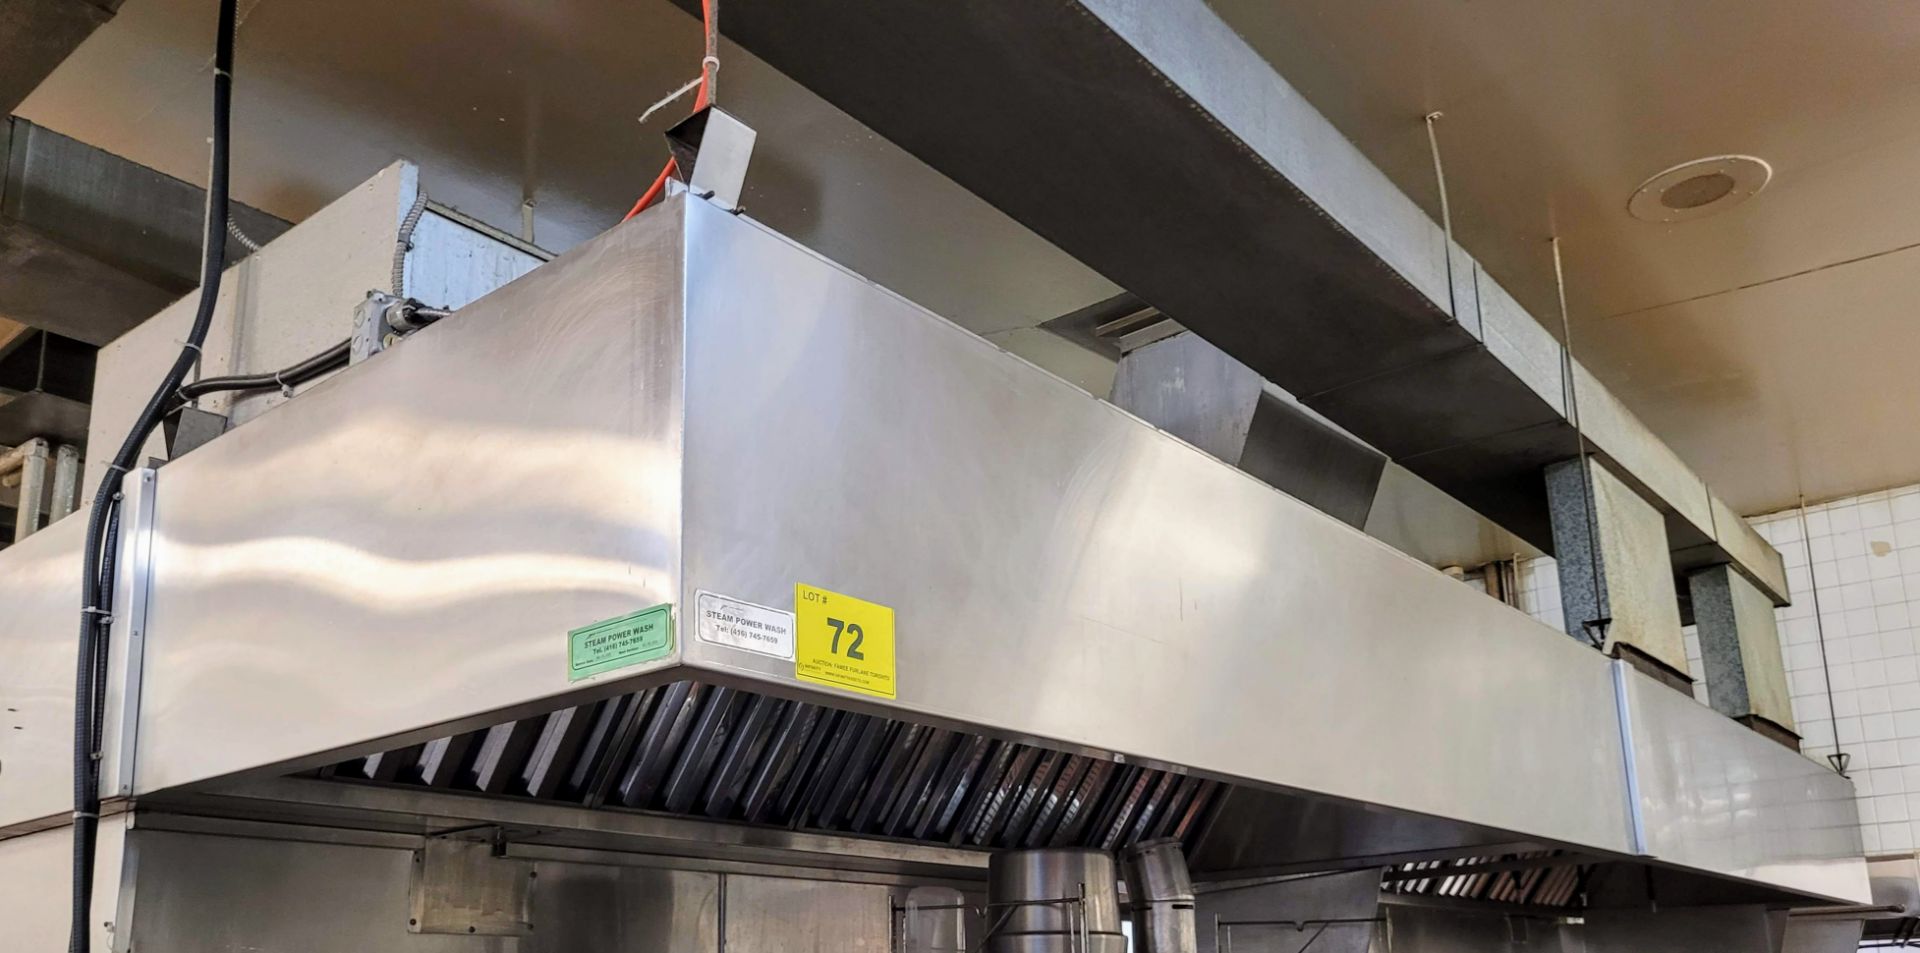 STAINLESS STEEL EXHAUST HOOD W/ FIRE SUPPRESSION, APPROX 20'L X 10'W